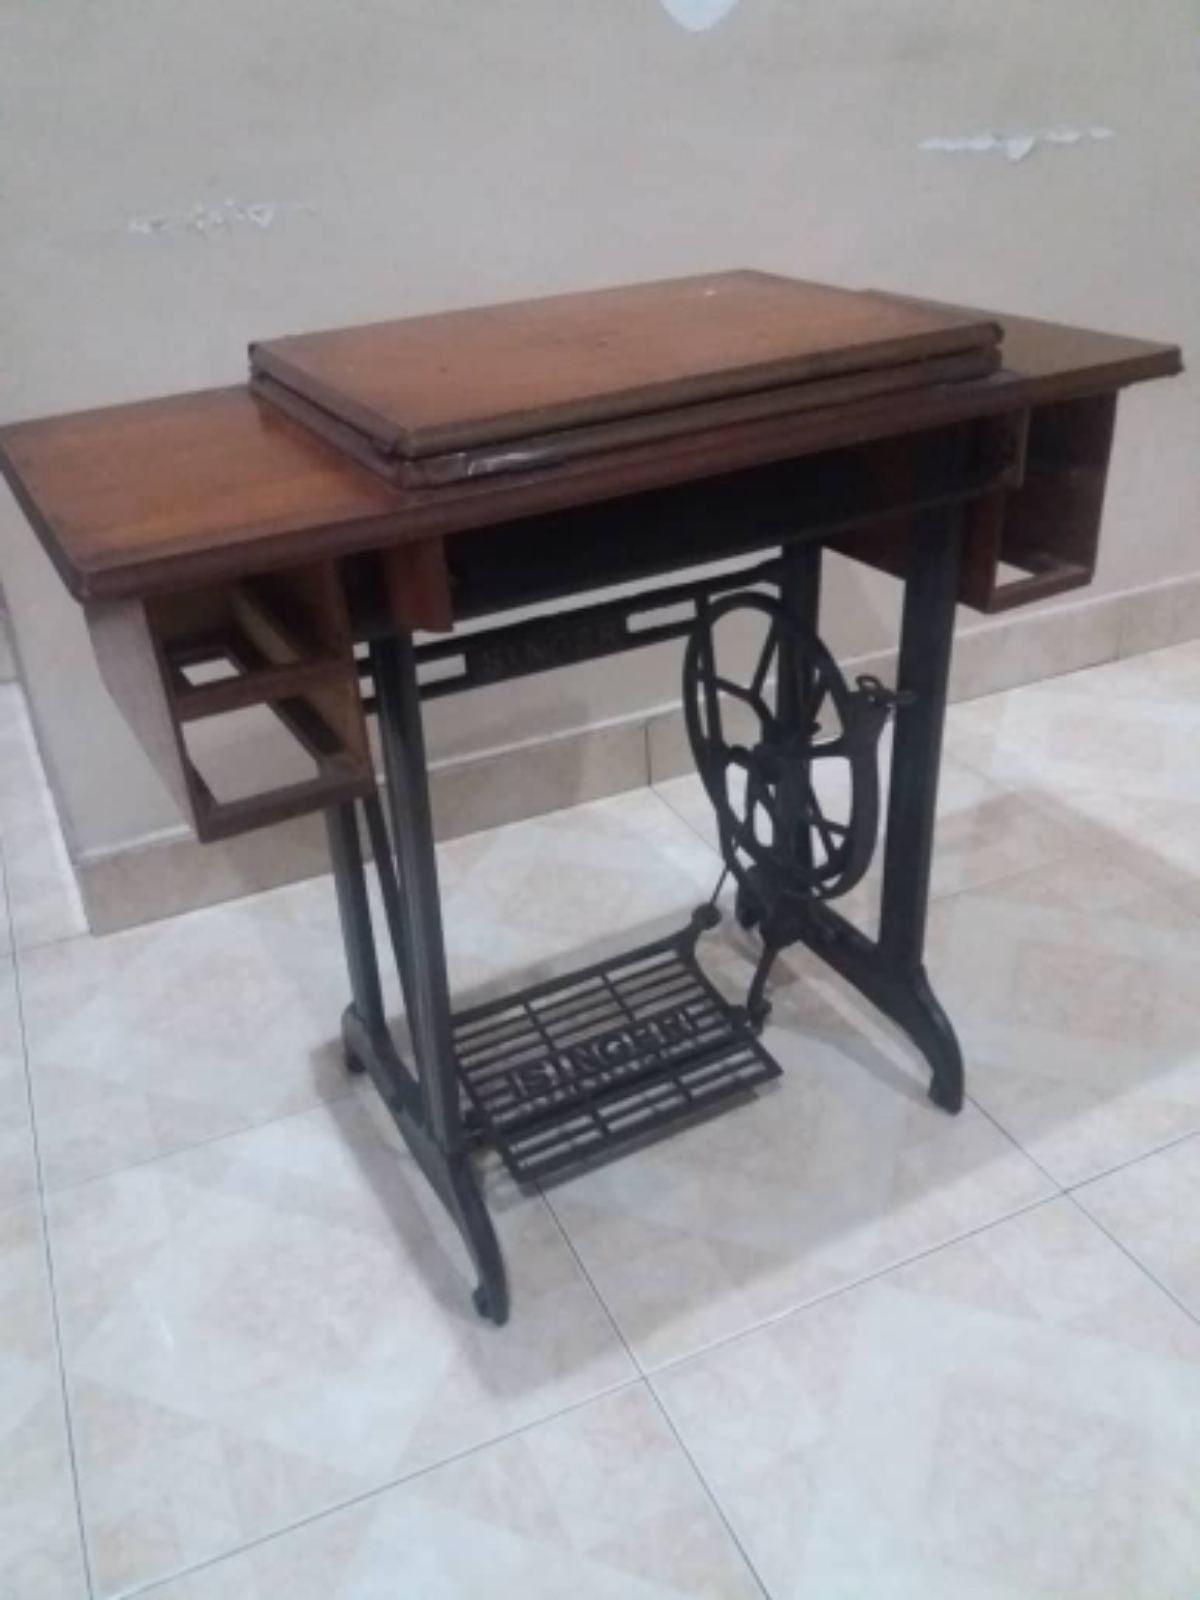 JOB CHANGE OLW TABLE FOR ANTIQUE SINGER SEWING MACHINE 